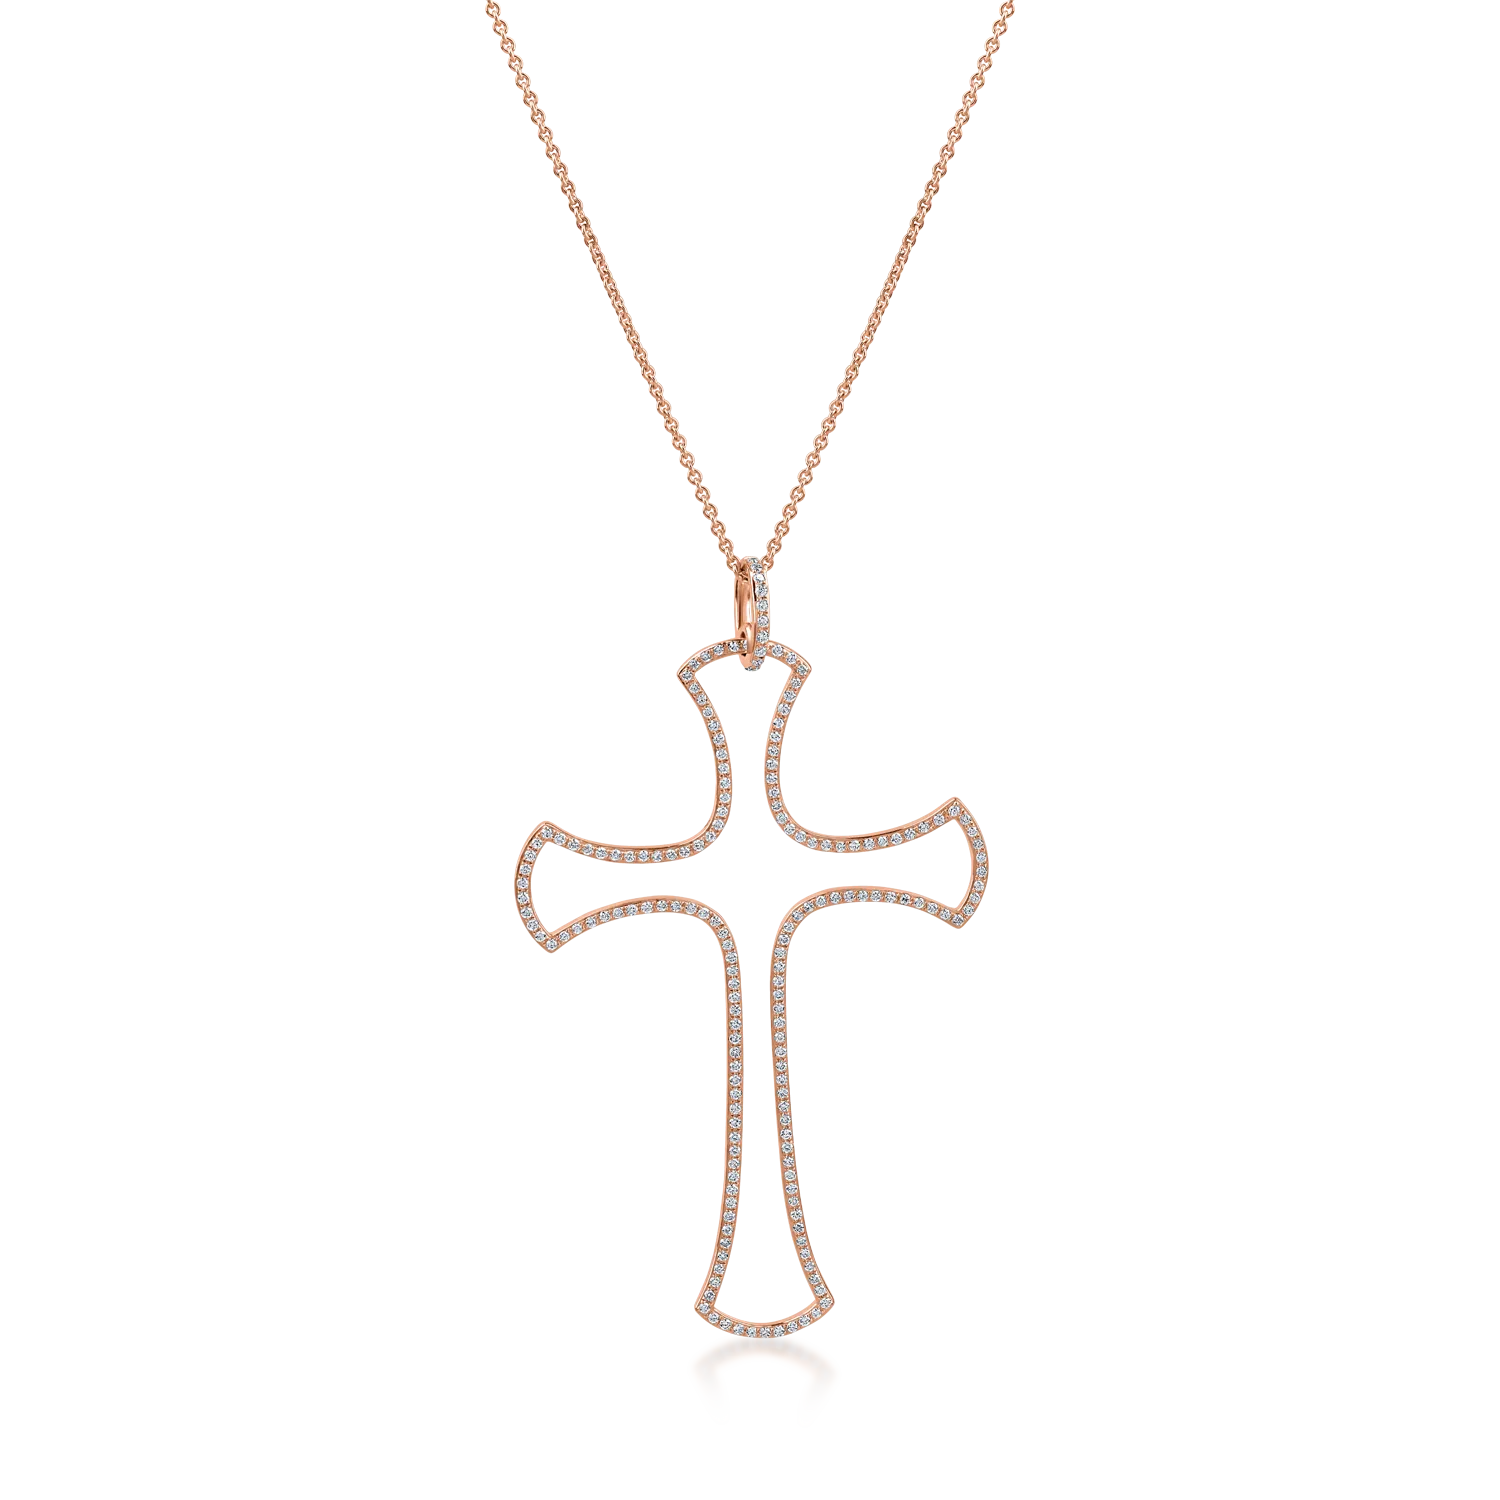 Rose gold cross pendant necklace with 0.9ct diamonds